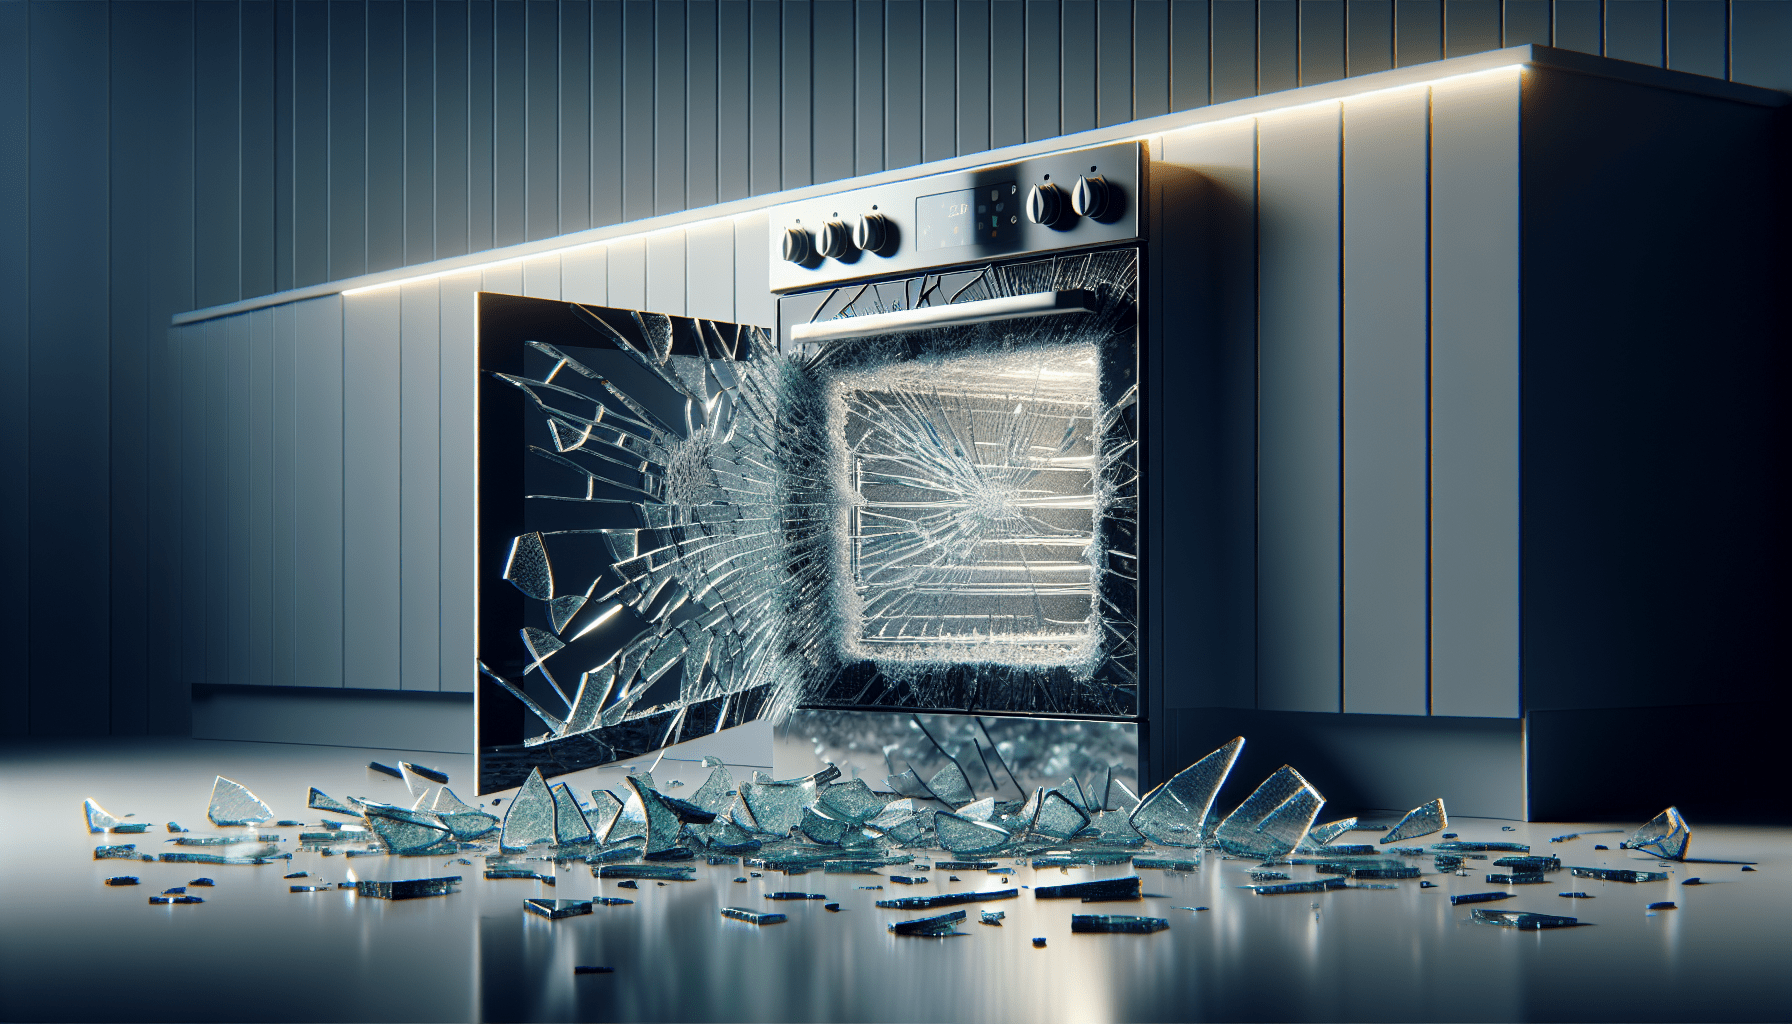 What Are The Disadvantages Of Built In Appliances?